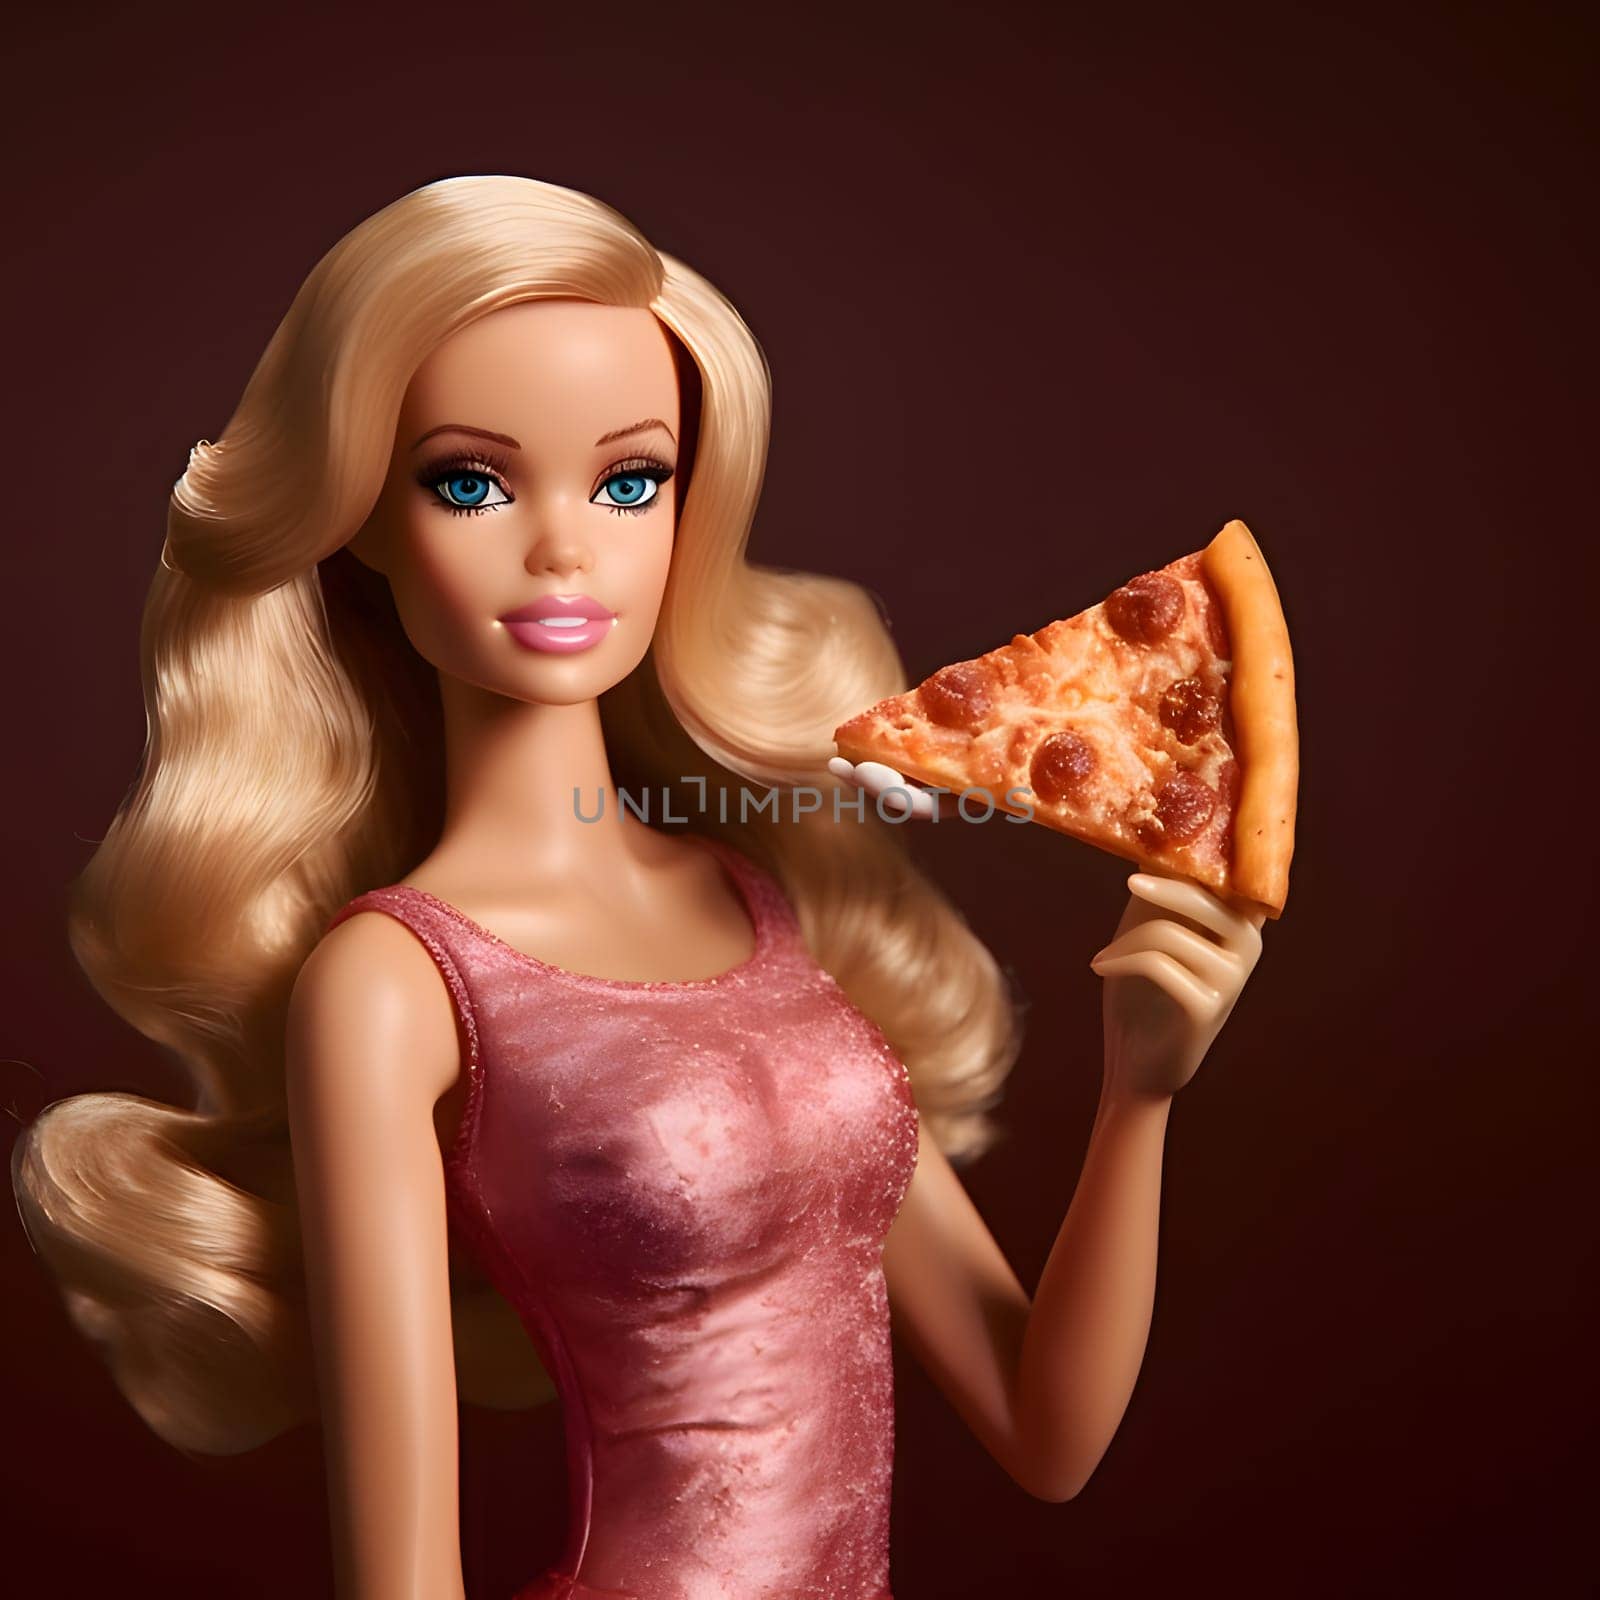 Young with long brown hair Barbie with slice of pizza in her hand, dark background.Elegant girl.